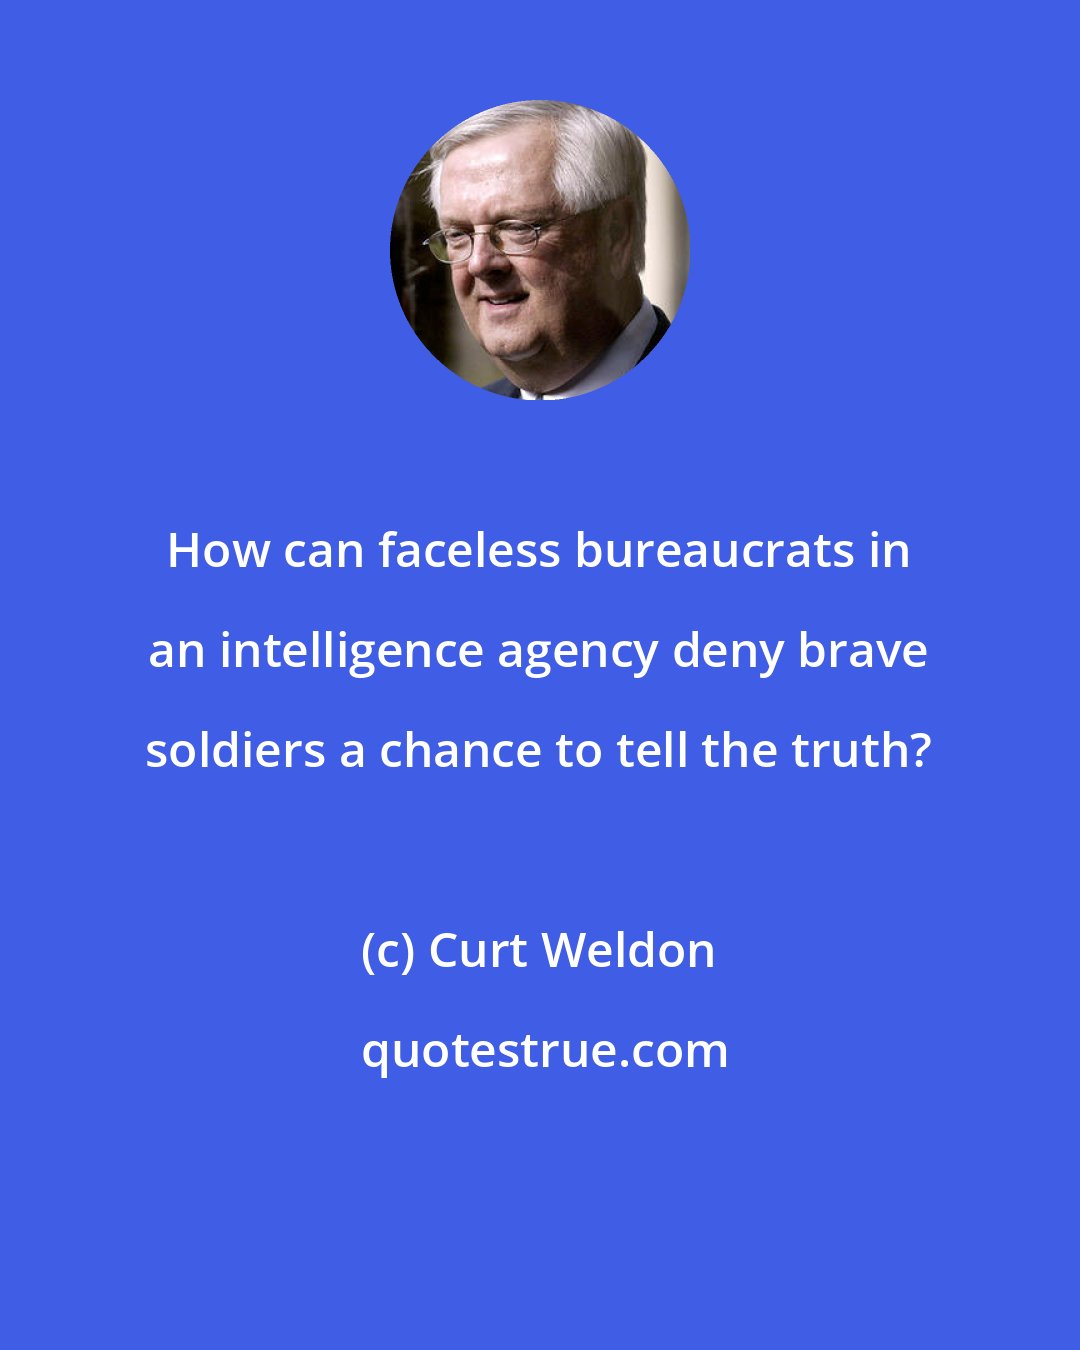 Curt Weldon: How can faceless bureaucrats in an intelligence agency deny brave soldiers a chance to tell the truth?